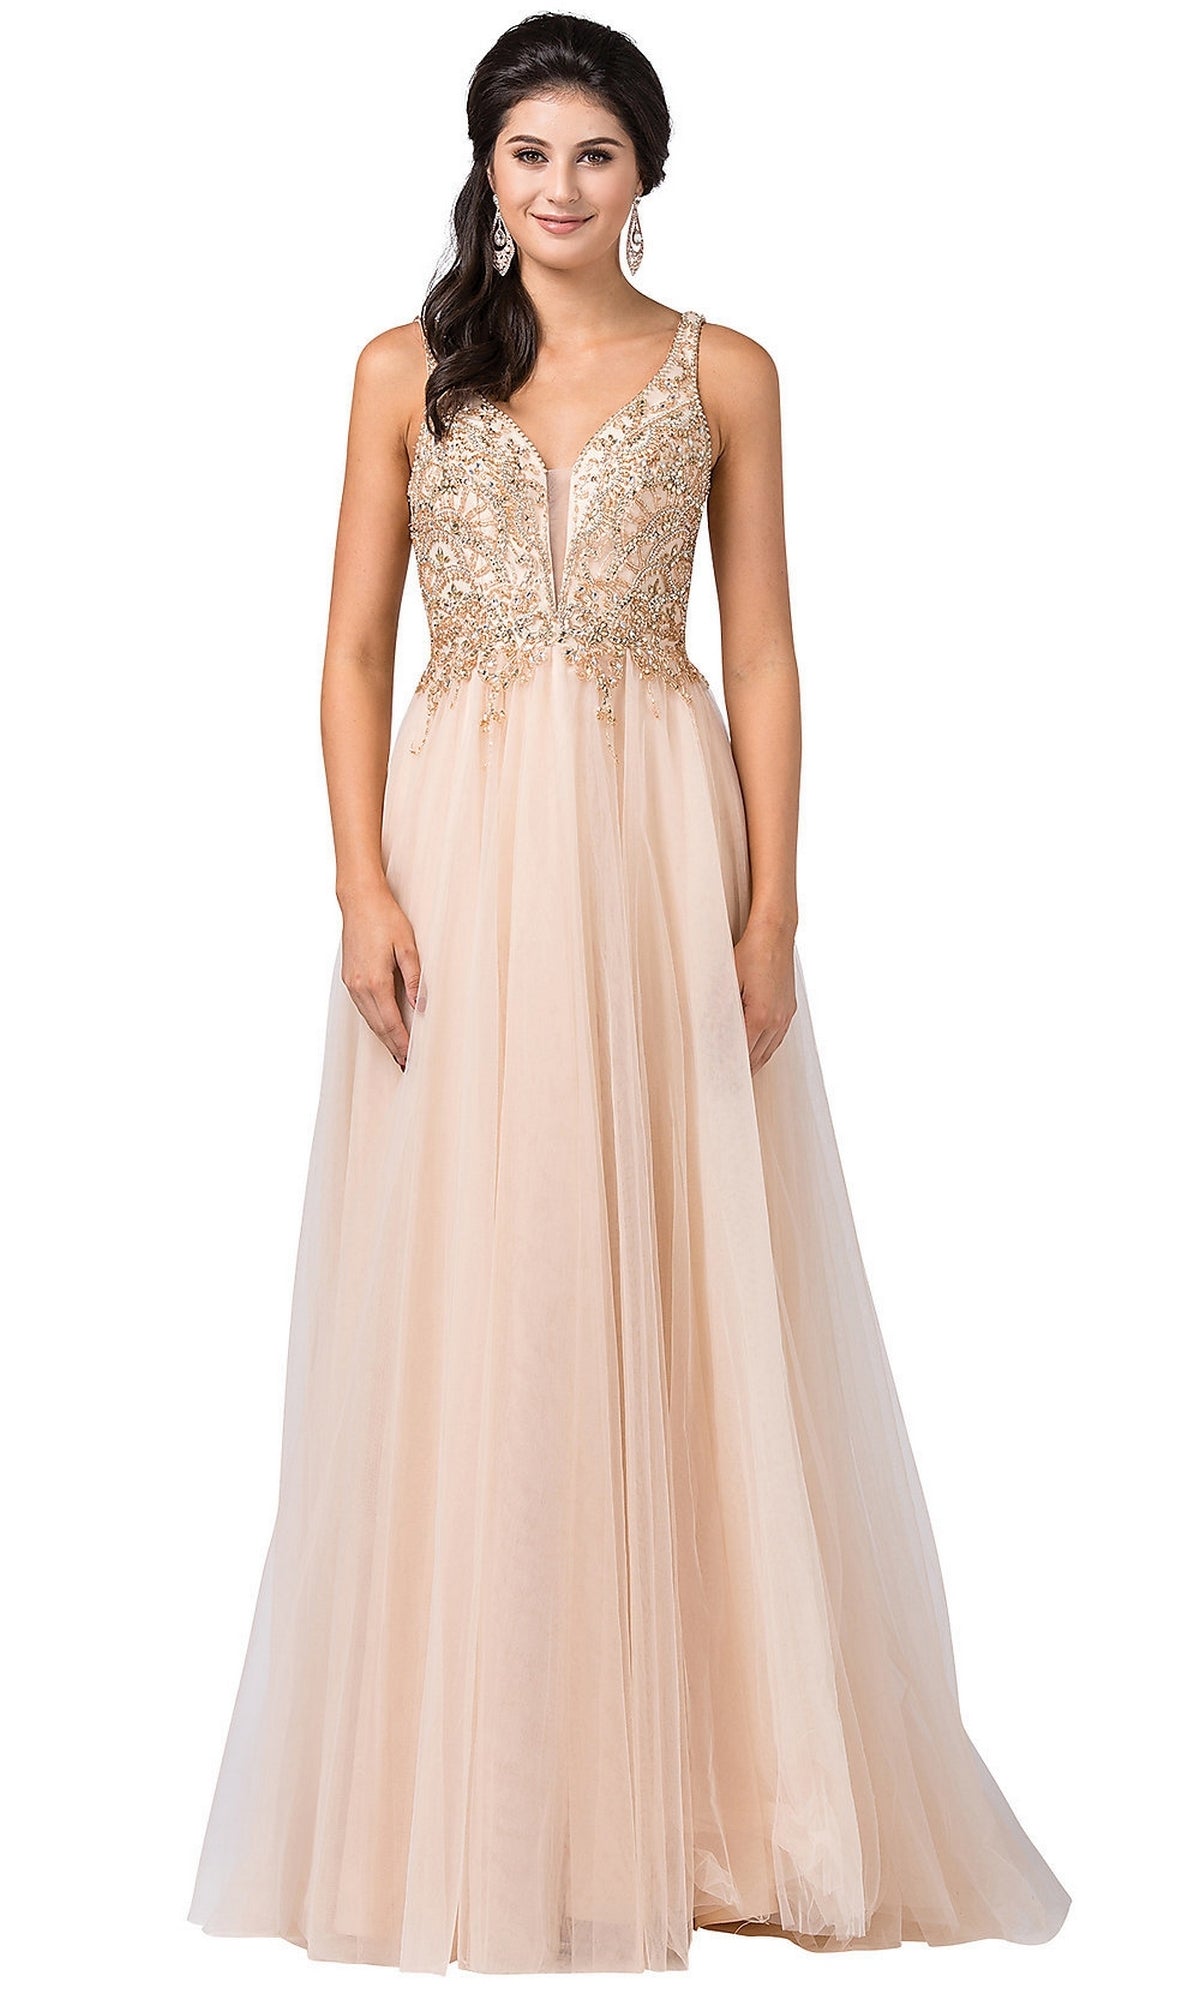 Champagne V-Neck Formal Evening Ball Gown with Beaded Bodice